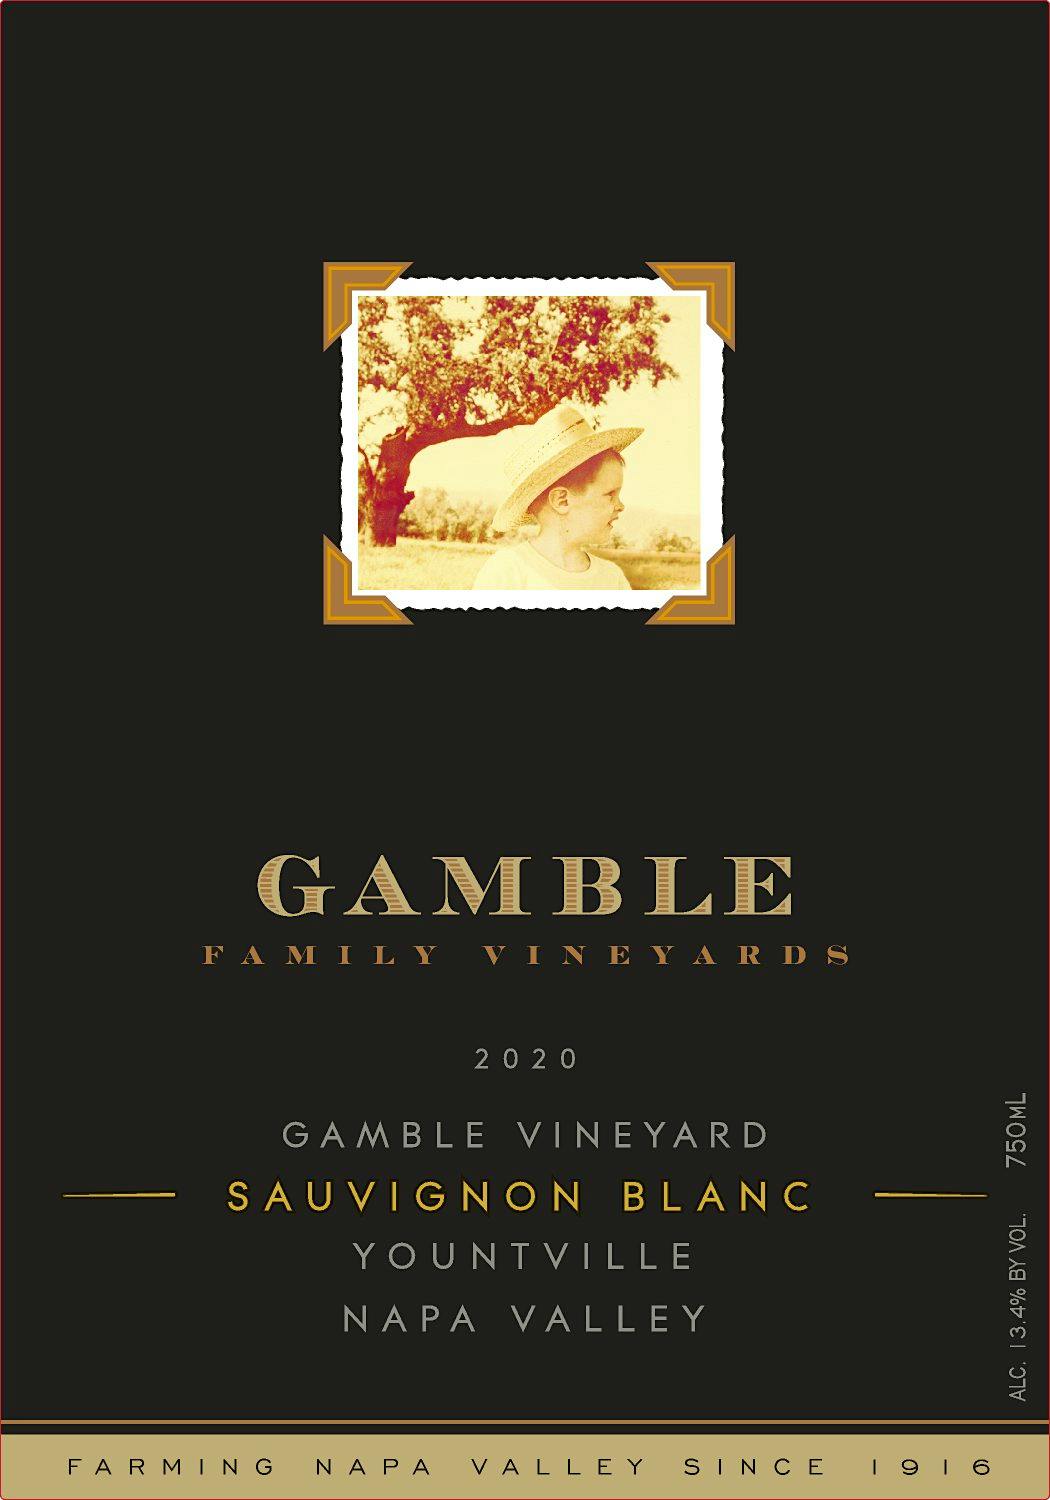 Label for Gamble Family